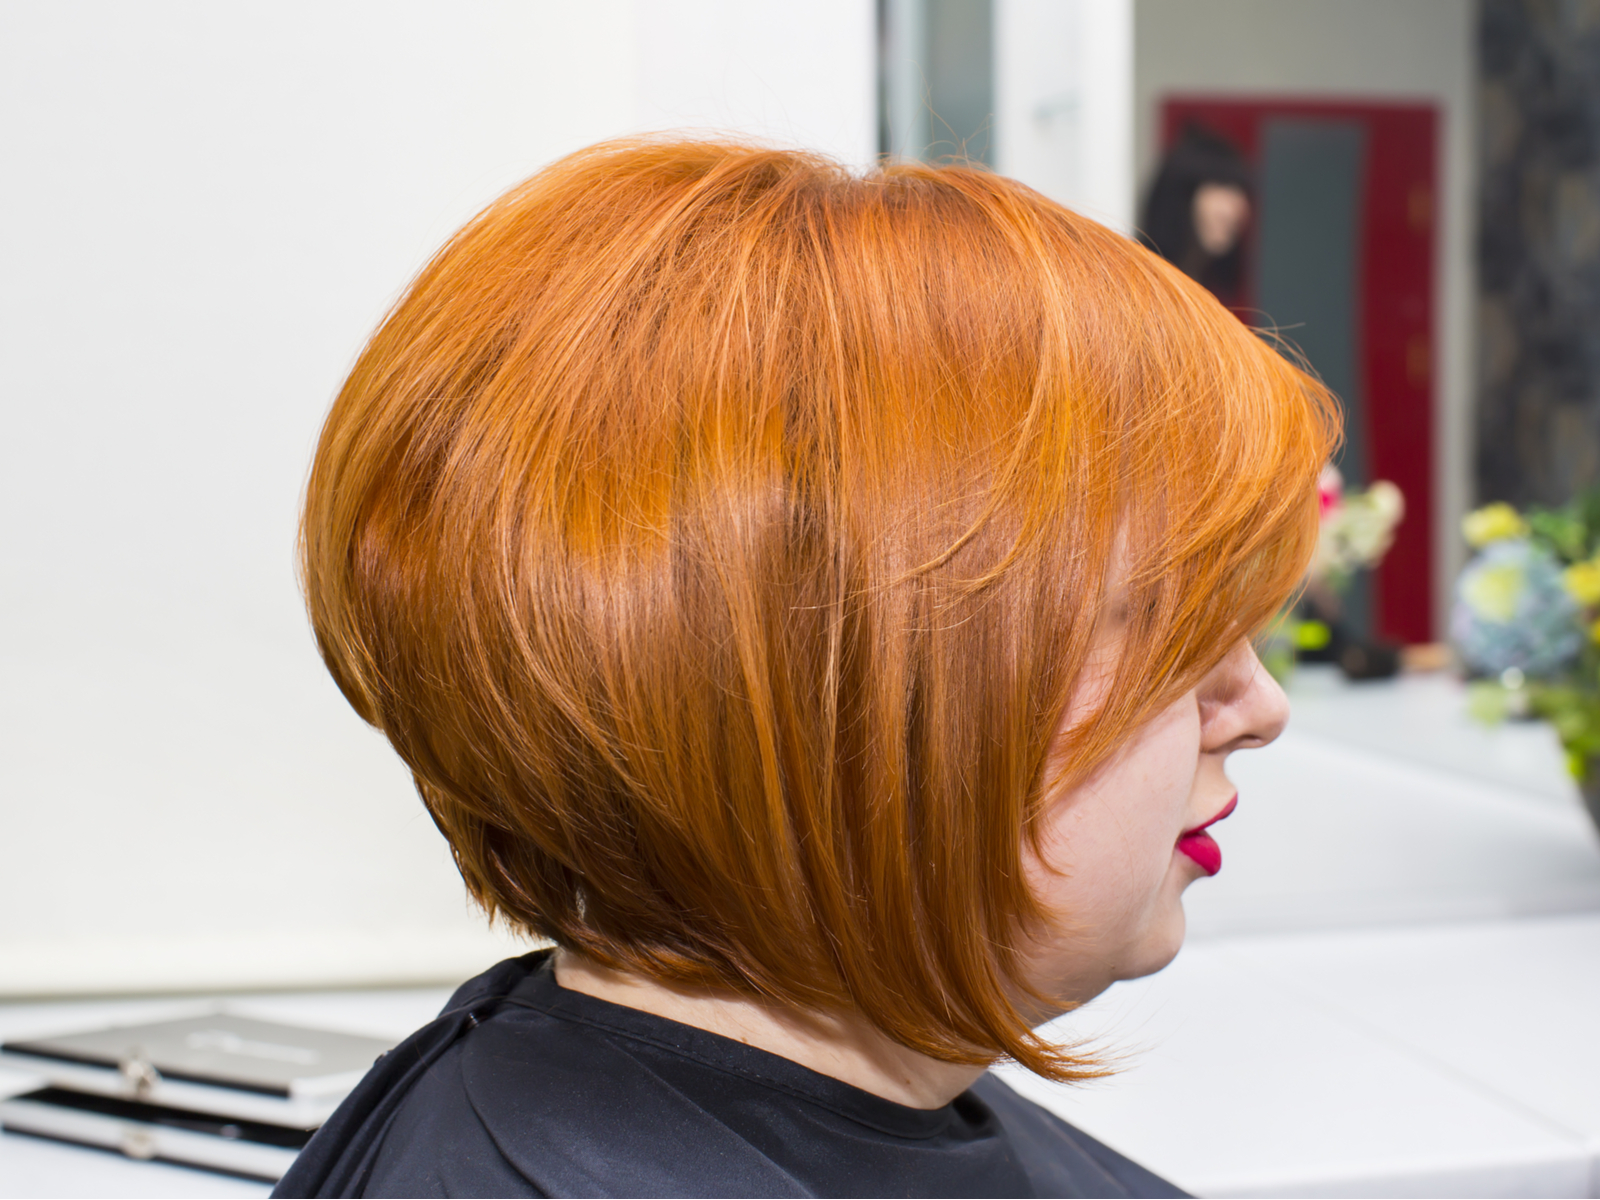 Inverted Bob With Crown Volume and Side-Swept Bangs, one of the best haircuts for fat faces